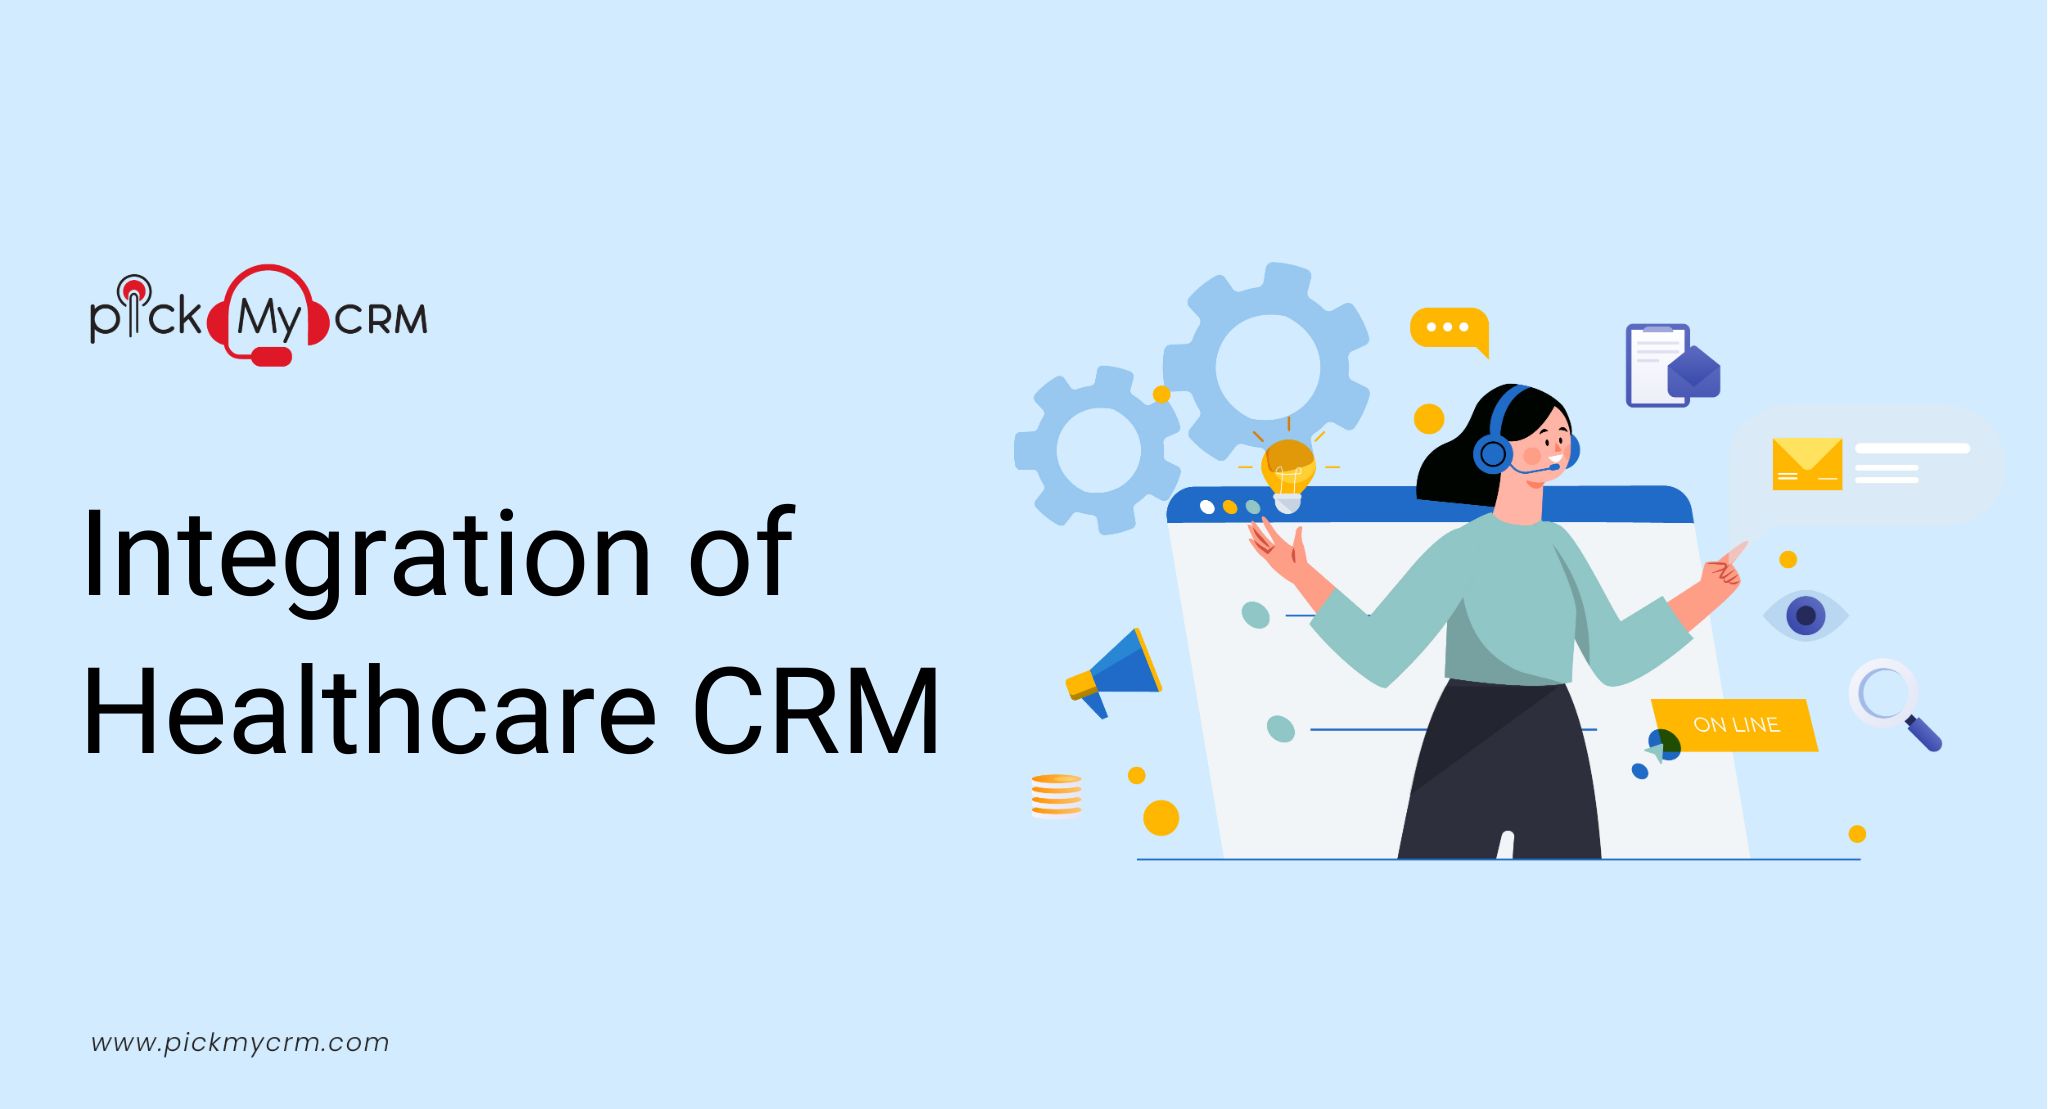 Integration of Healthcare CRM